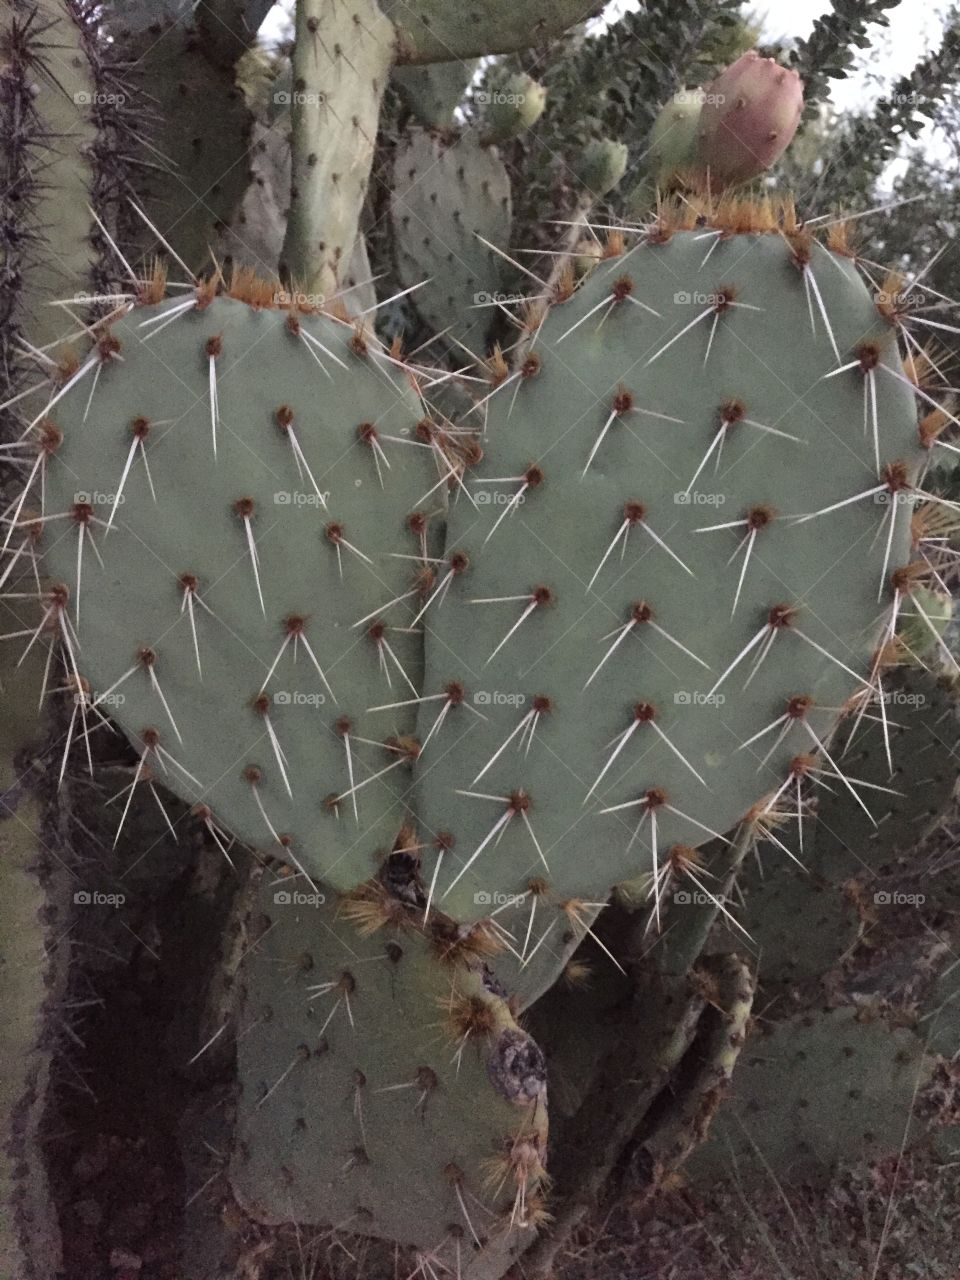 Prickly pear cactus growing outdoors